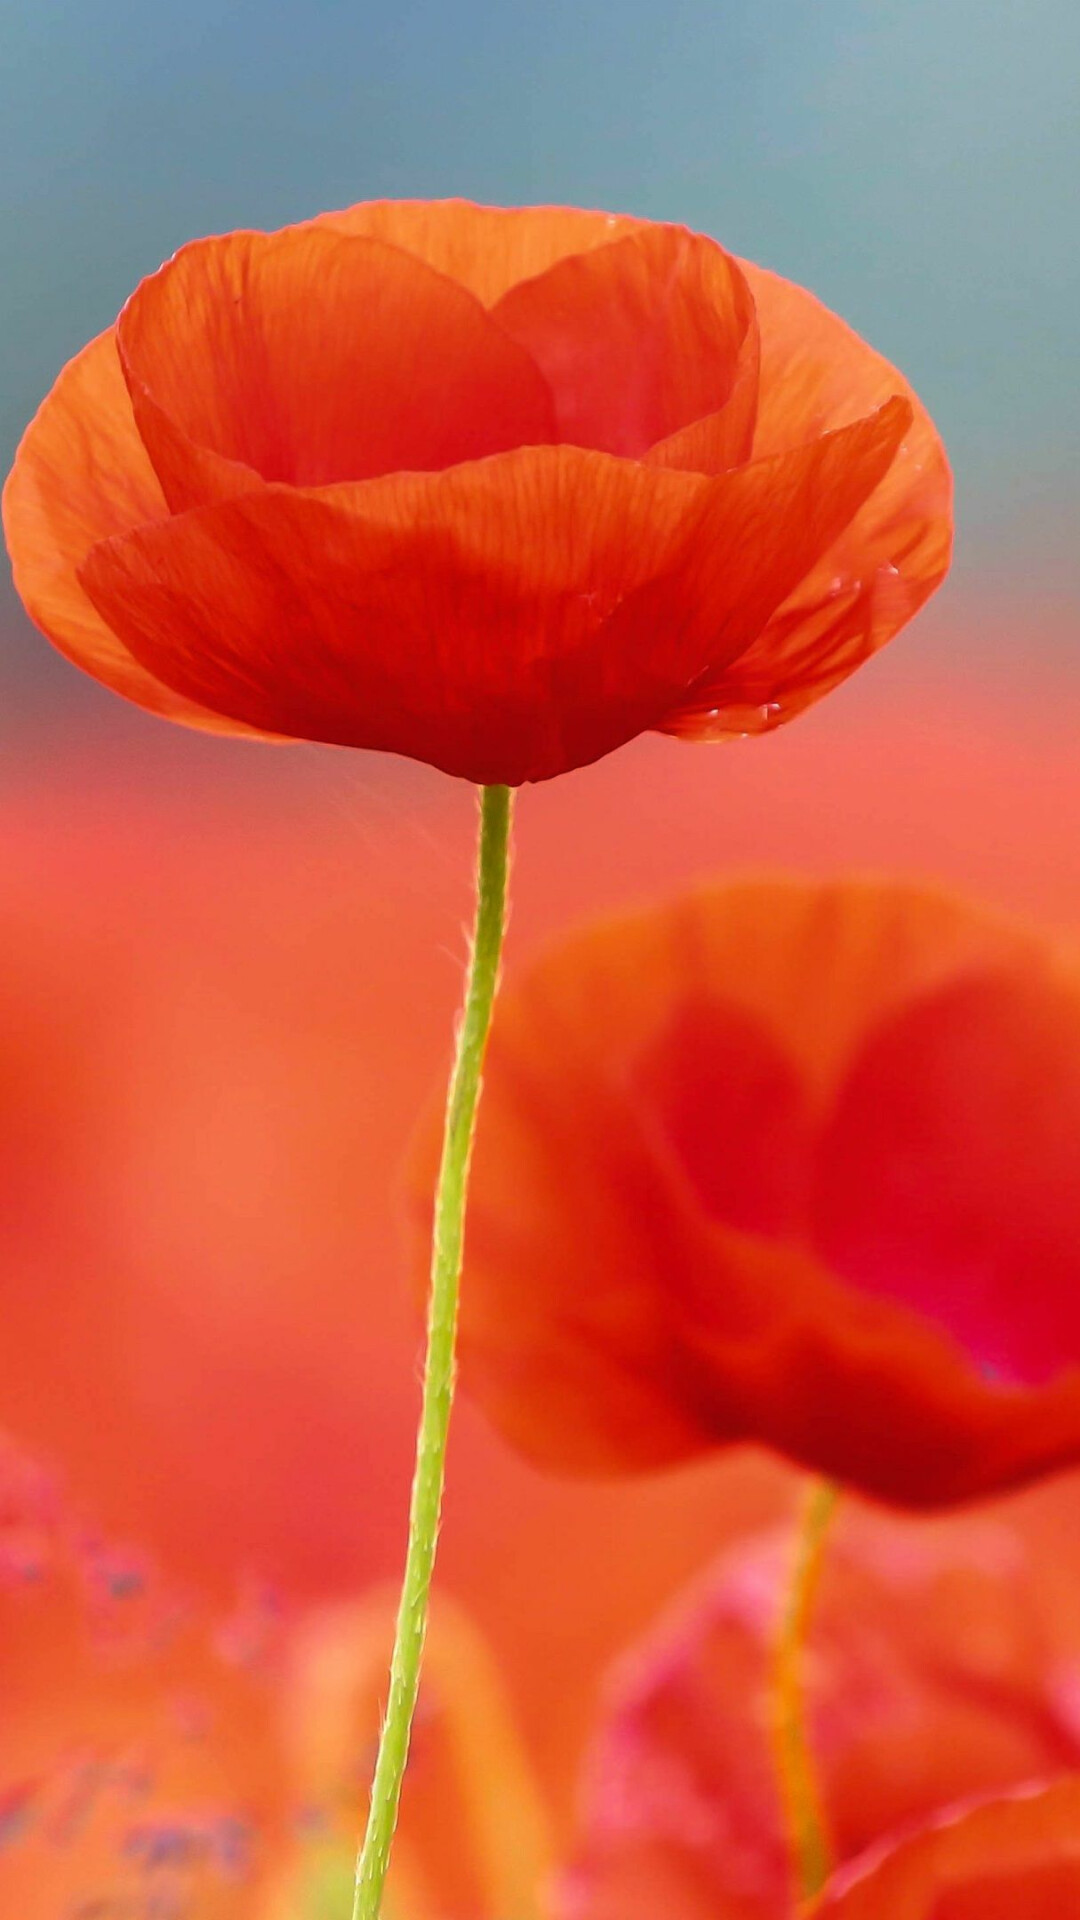 Poppy Flower: Annual poppies are often planted as part of a wildflower mix. 1080x1920 Full HD Wallpaper.